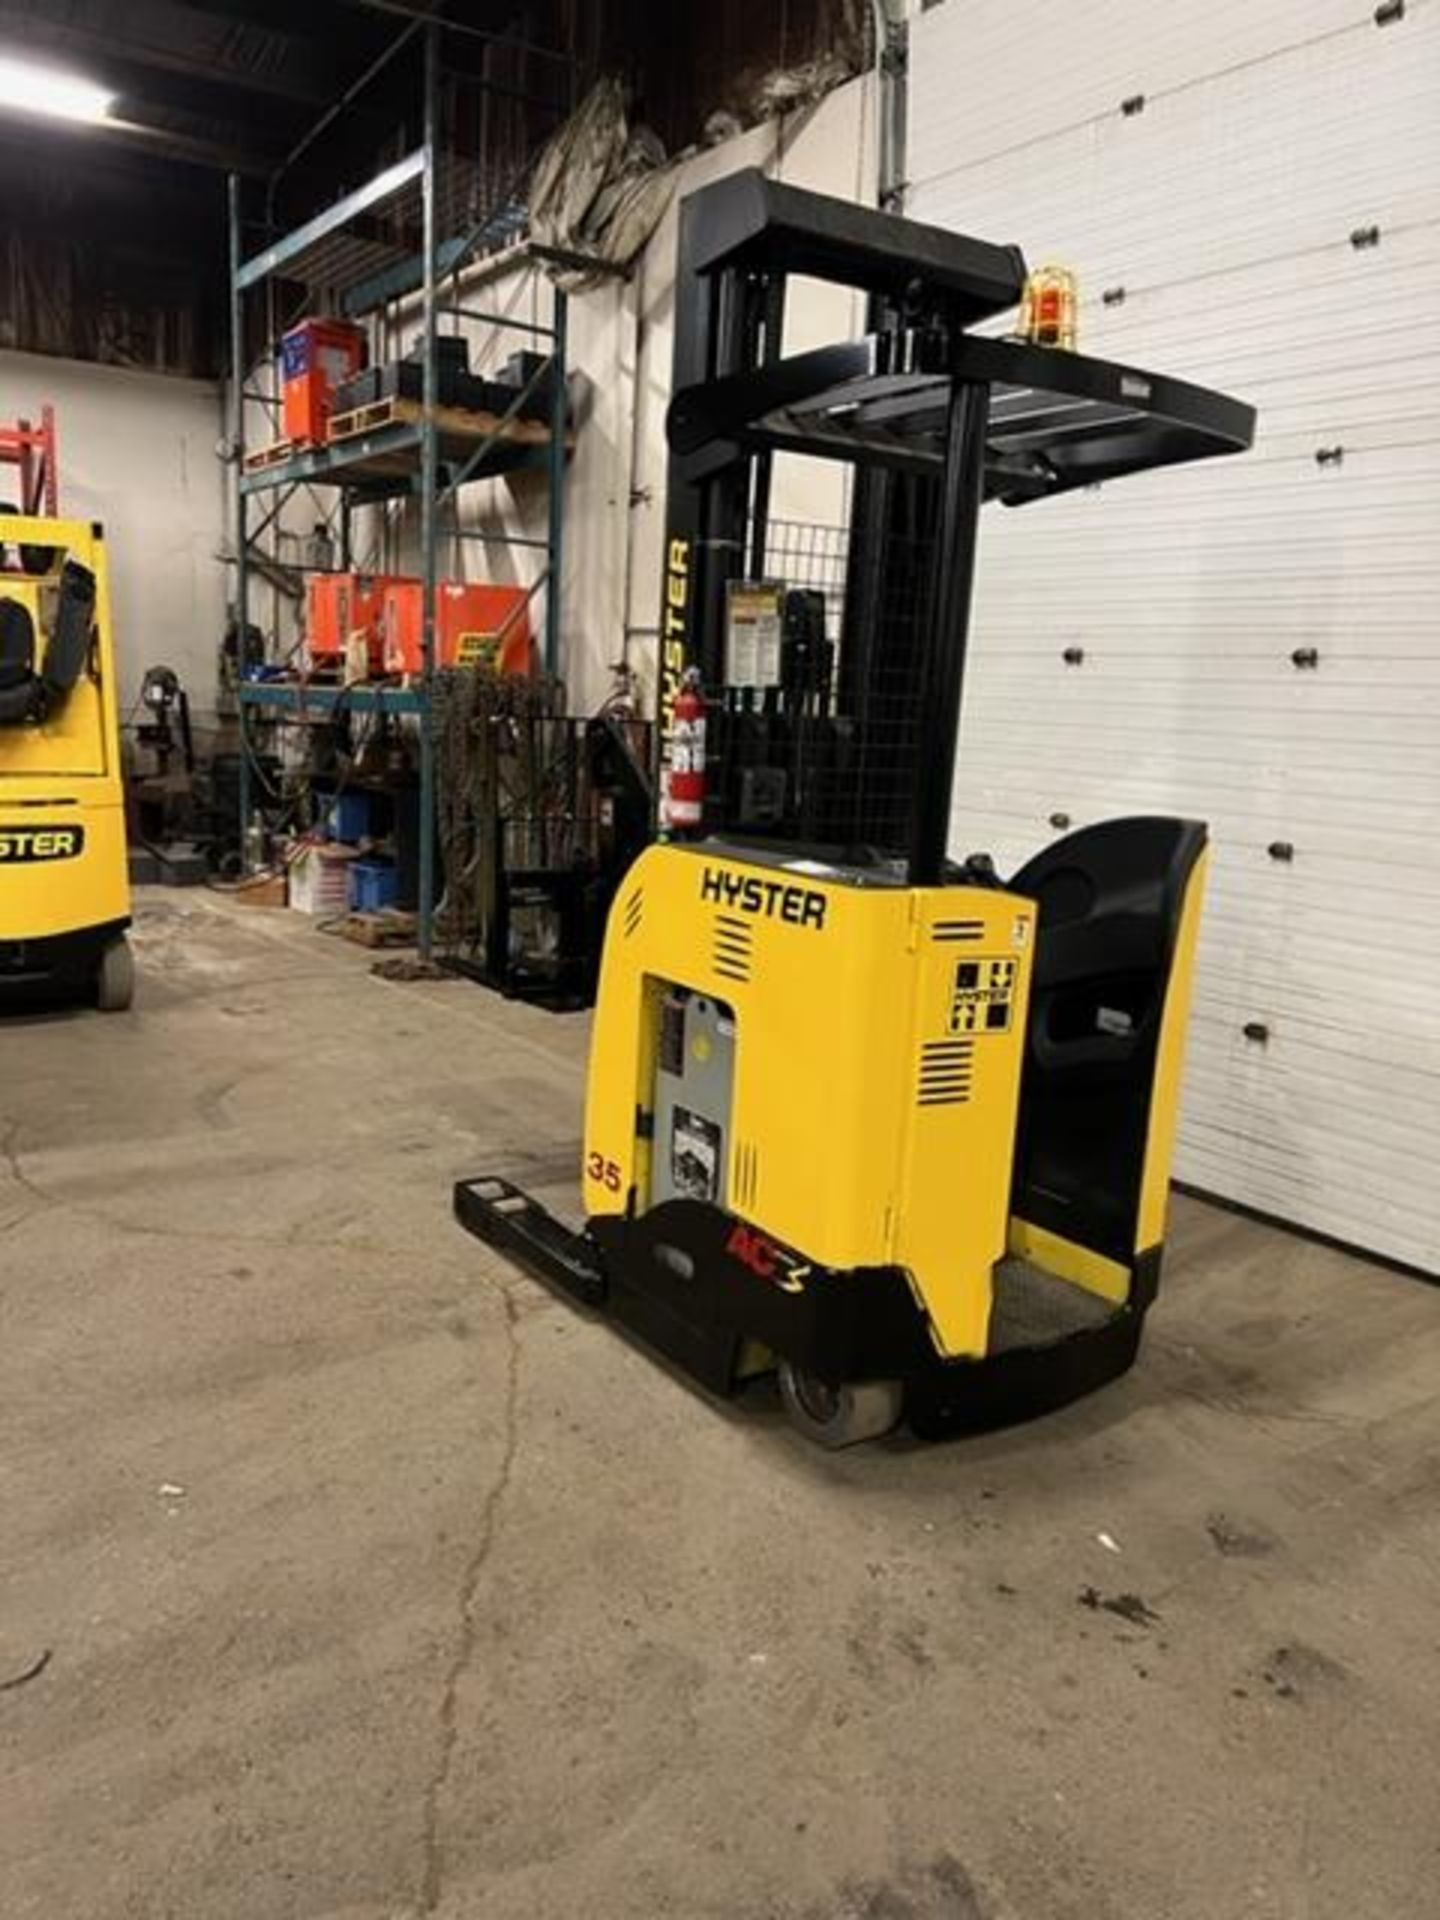 FREE CUSTOMS - 2016 Hyster Reach Truck Pallet Lifter REACH TRUCK 3500lbs capacity electric MINT - Image 3 of 3